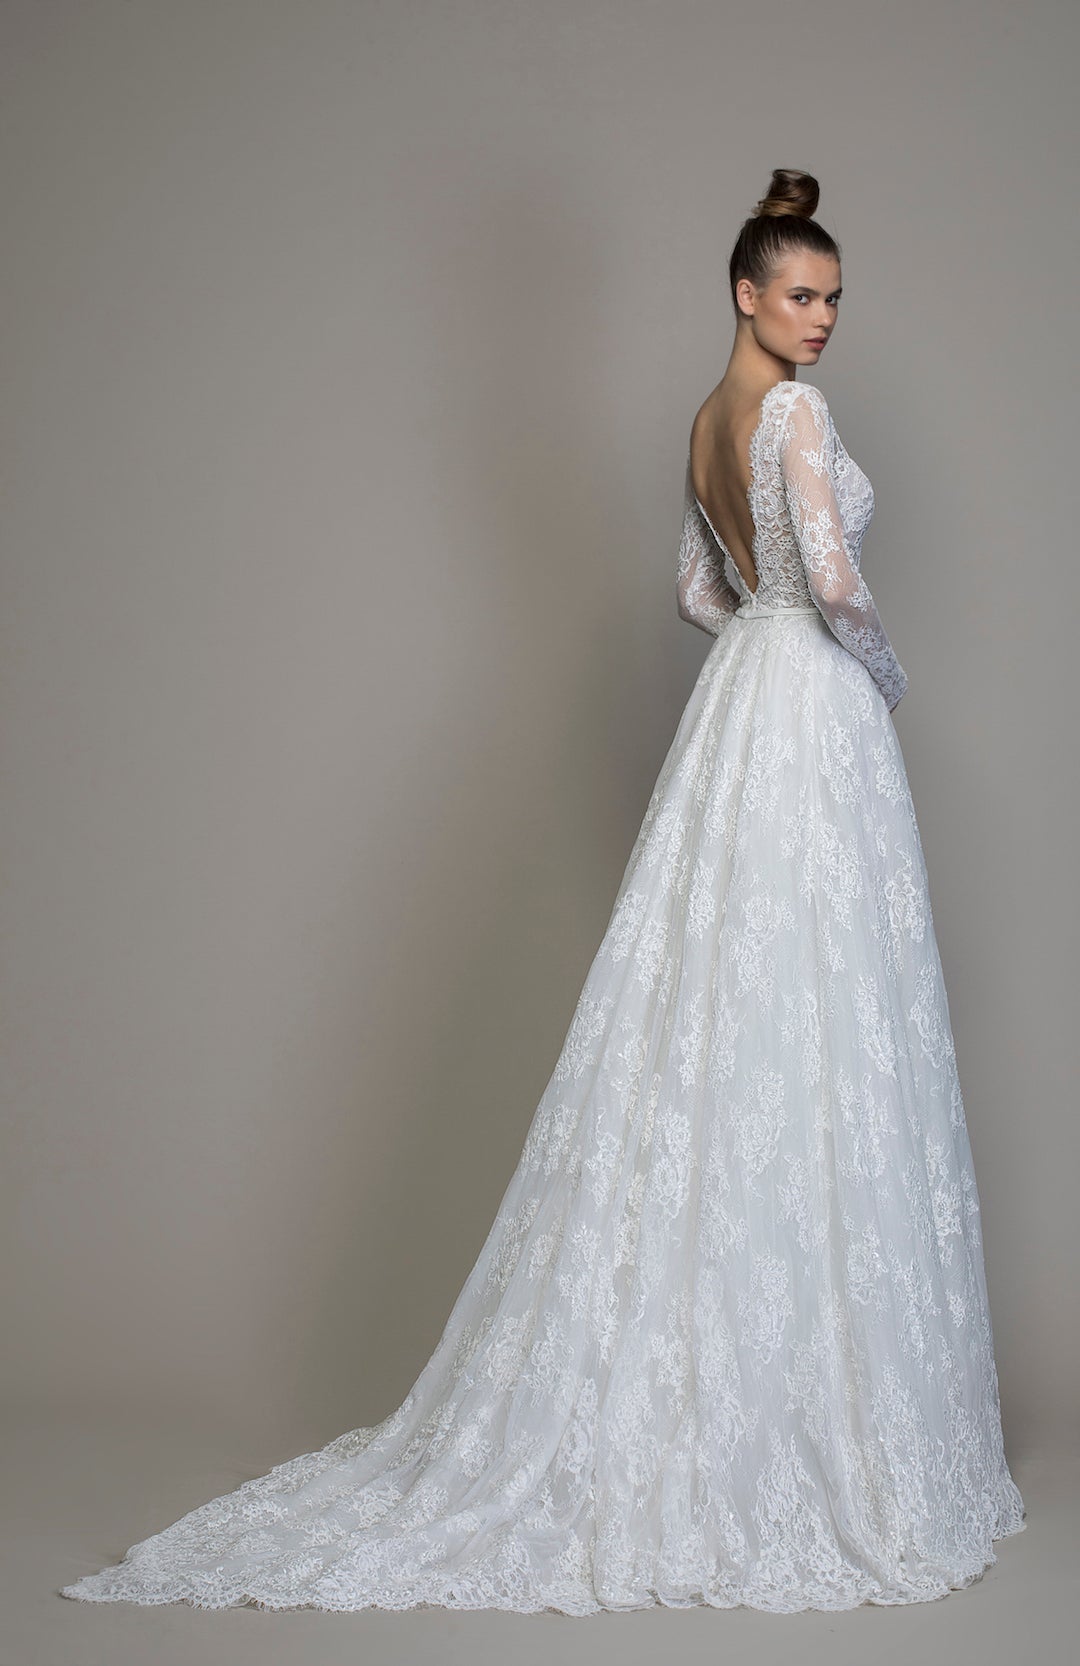 Pnina Tornai's new LOVE 2020 Collection is out! This is style 14781